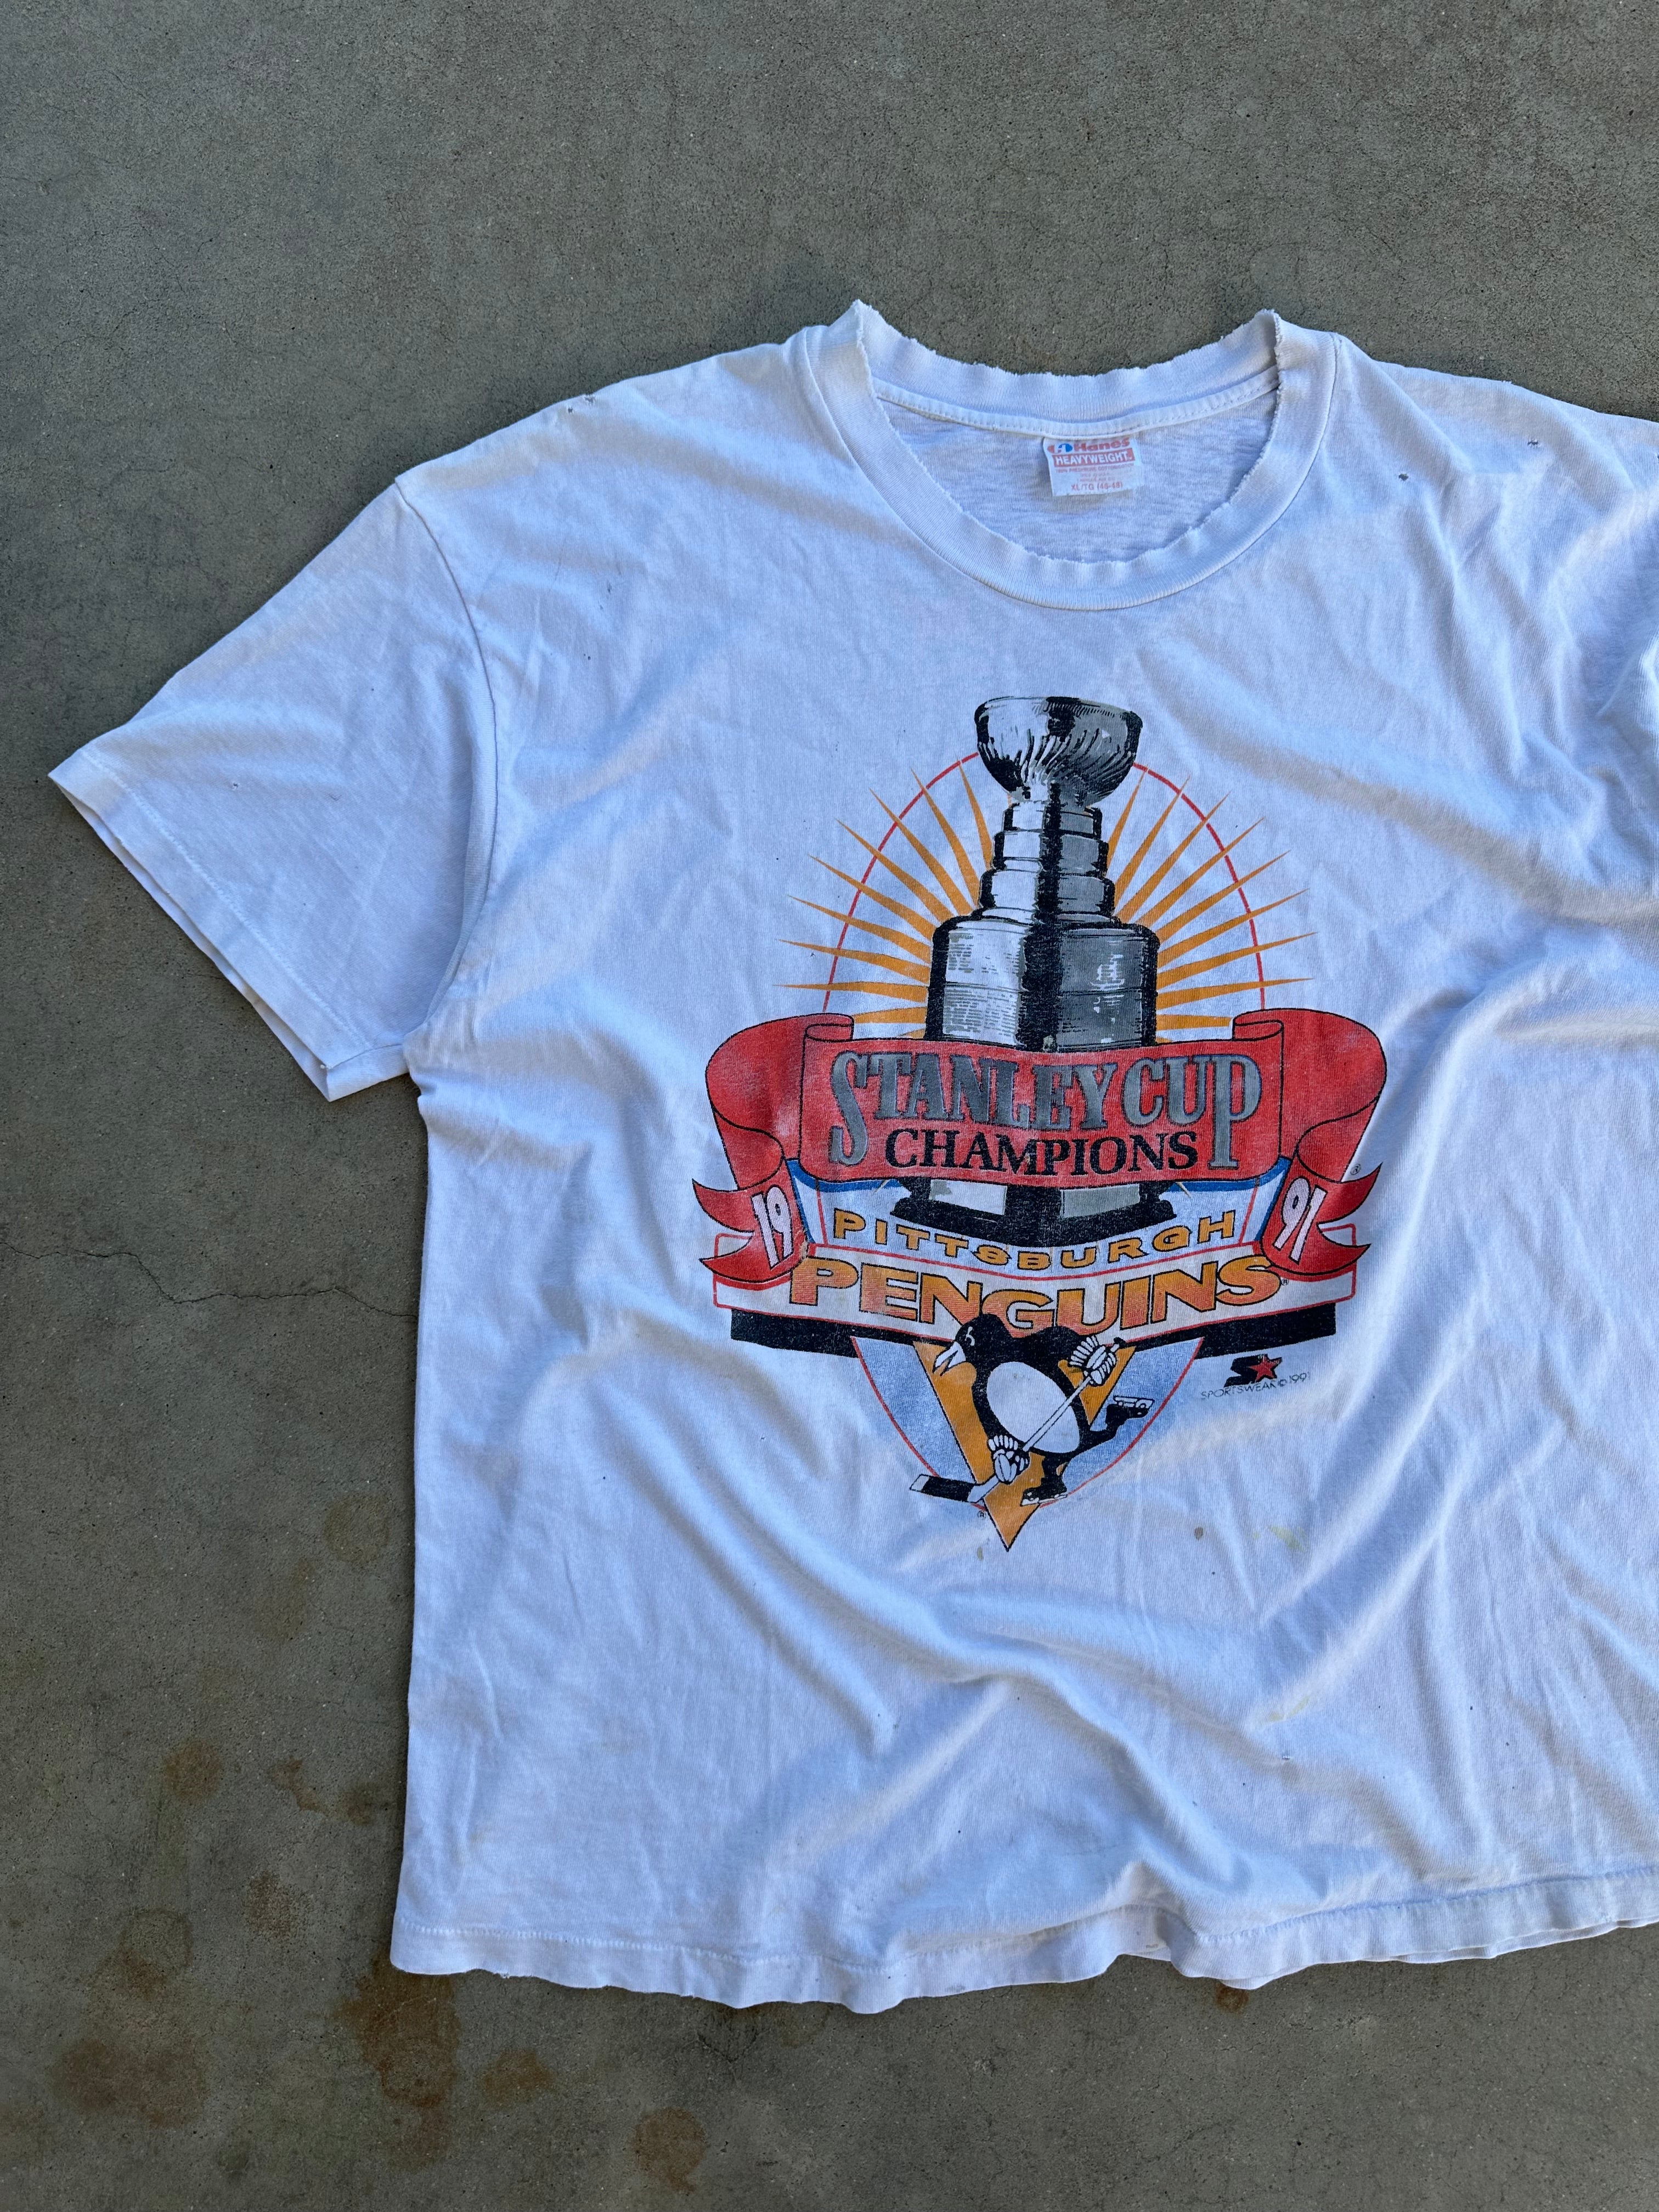 1991 Thrashed Stanley Cup Champion T-shirt (XL)